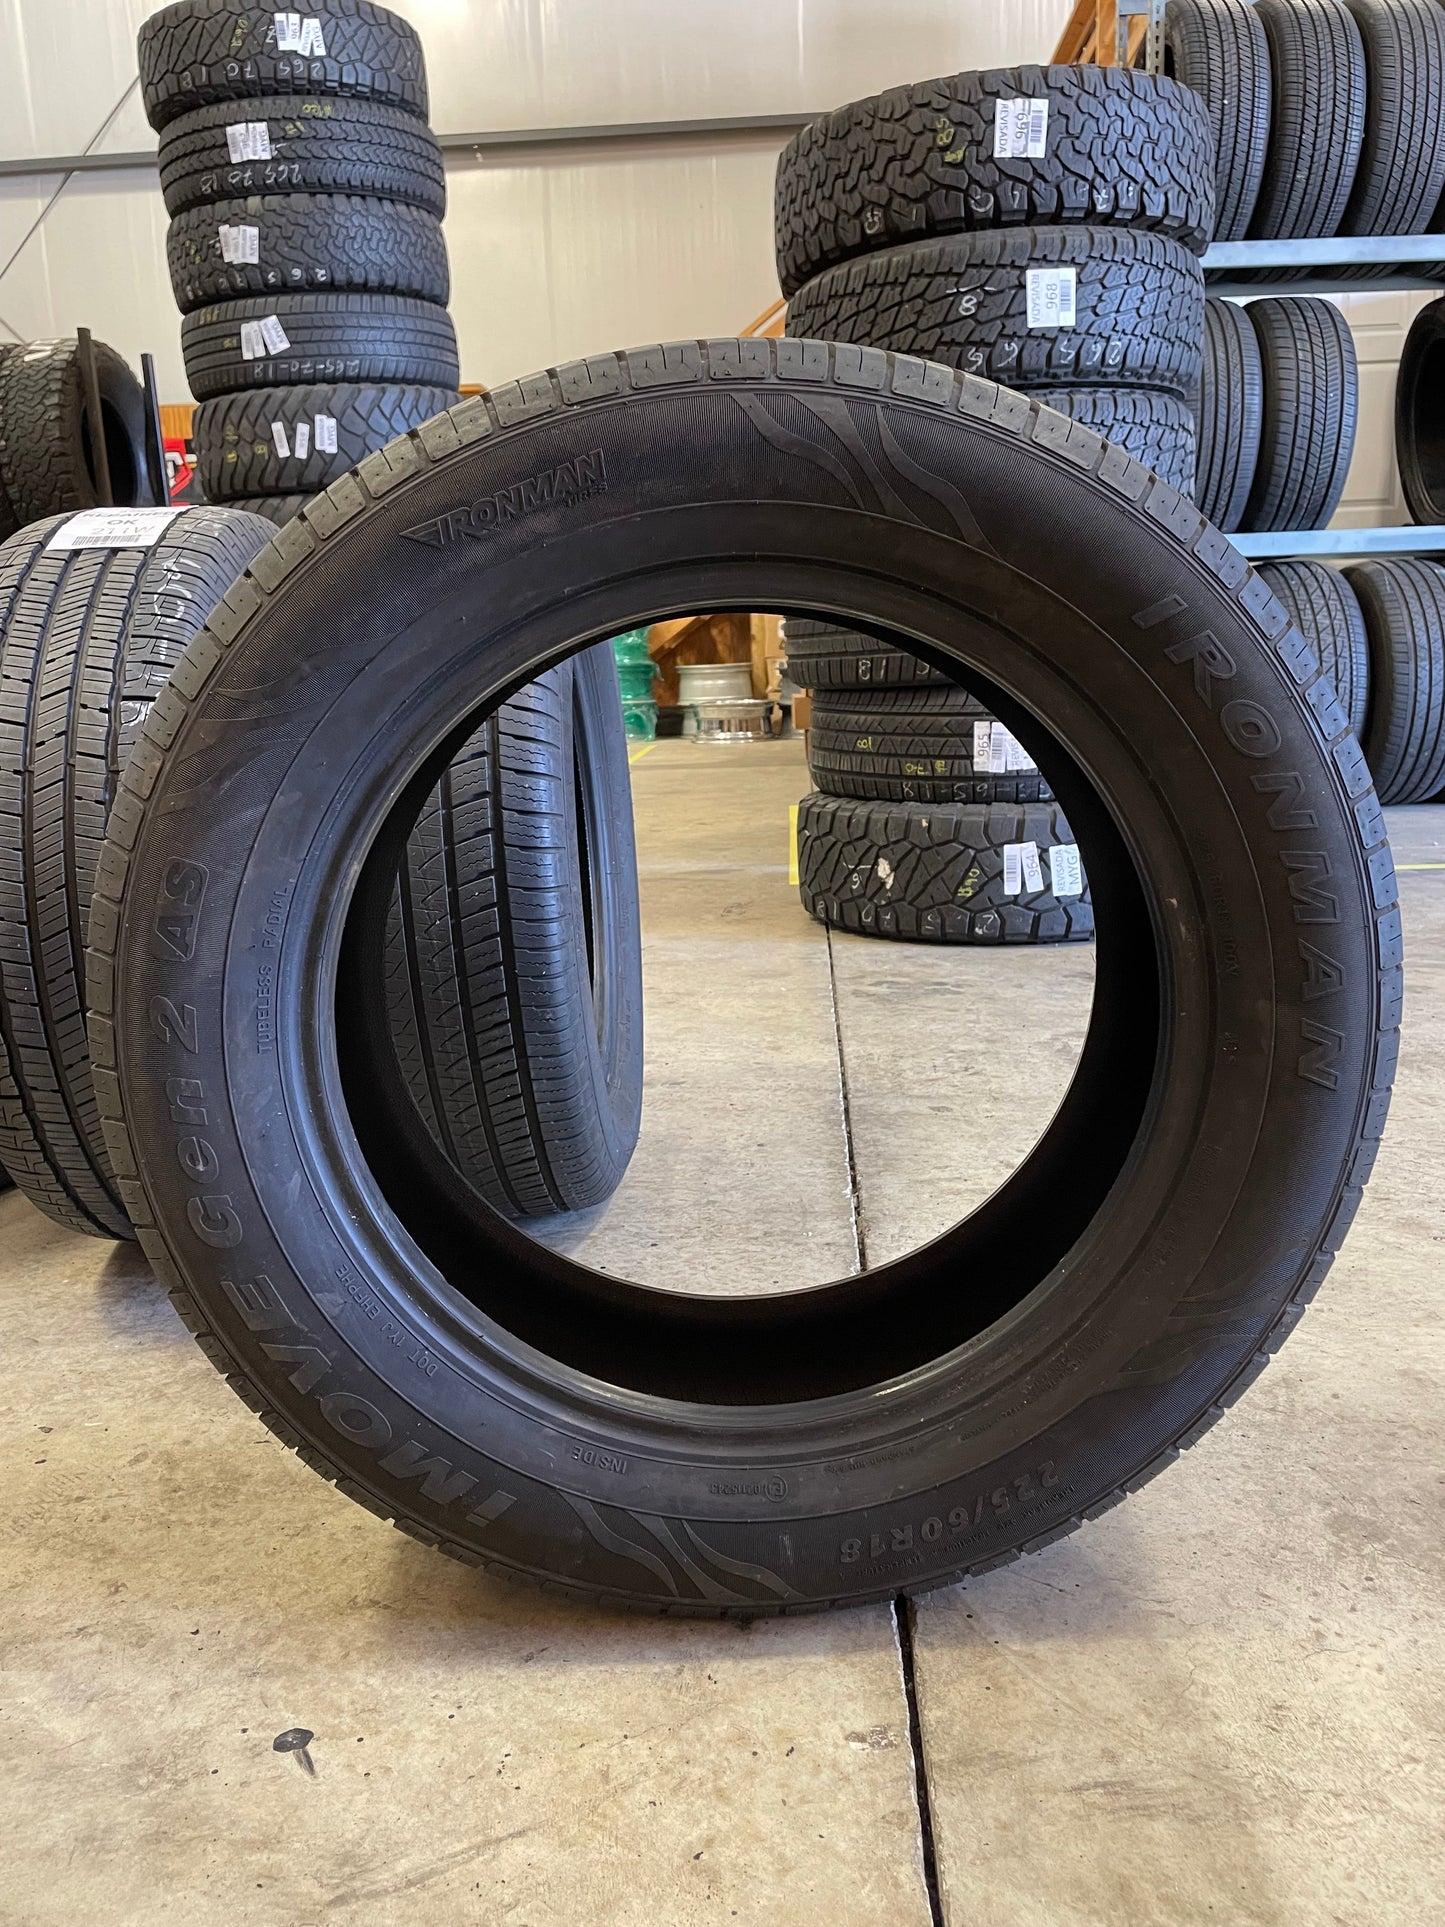 SINGLE 225/60R18 Ironman Imove Gen 2 AS 100 V SL - Used Tires